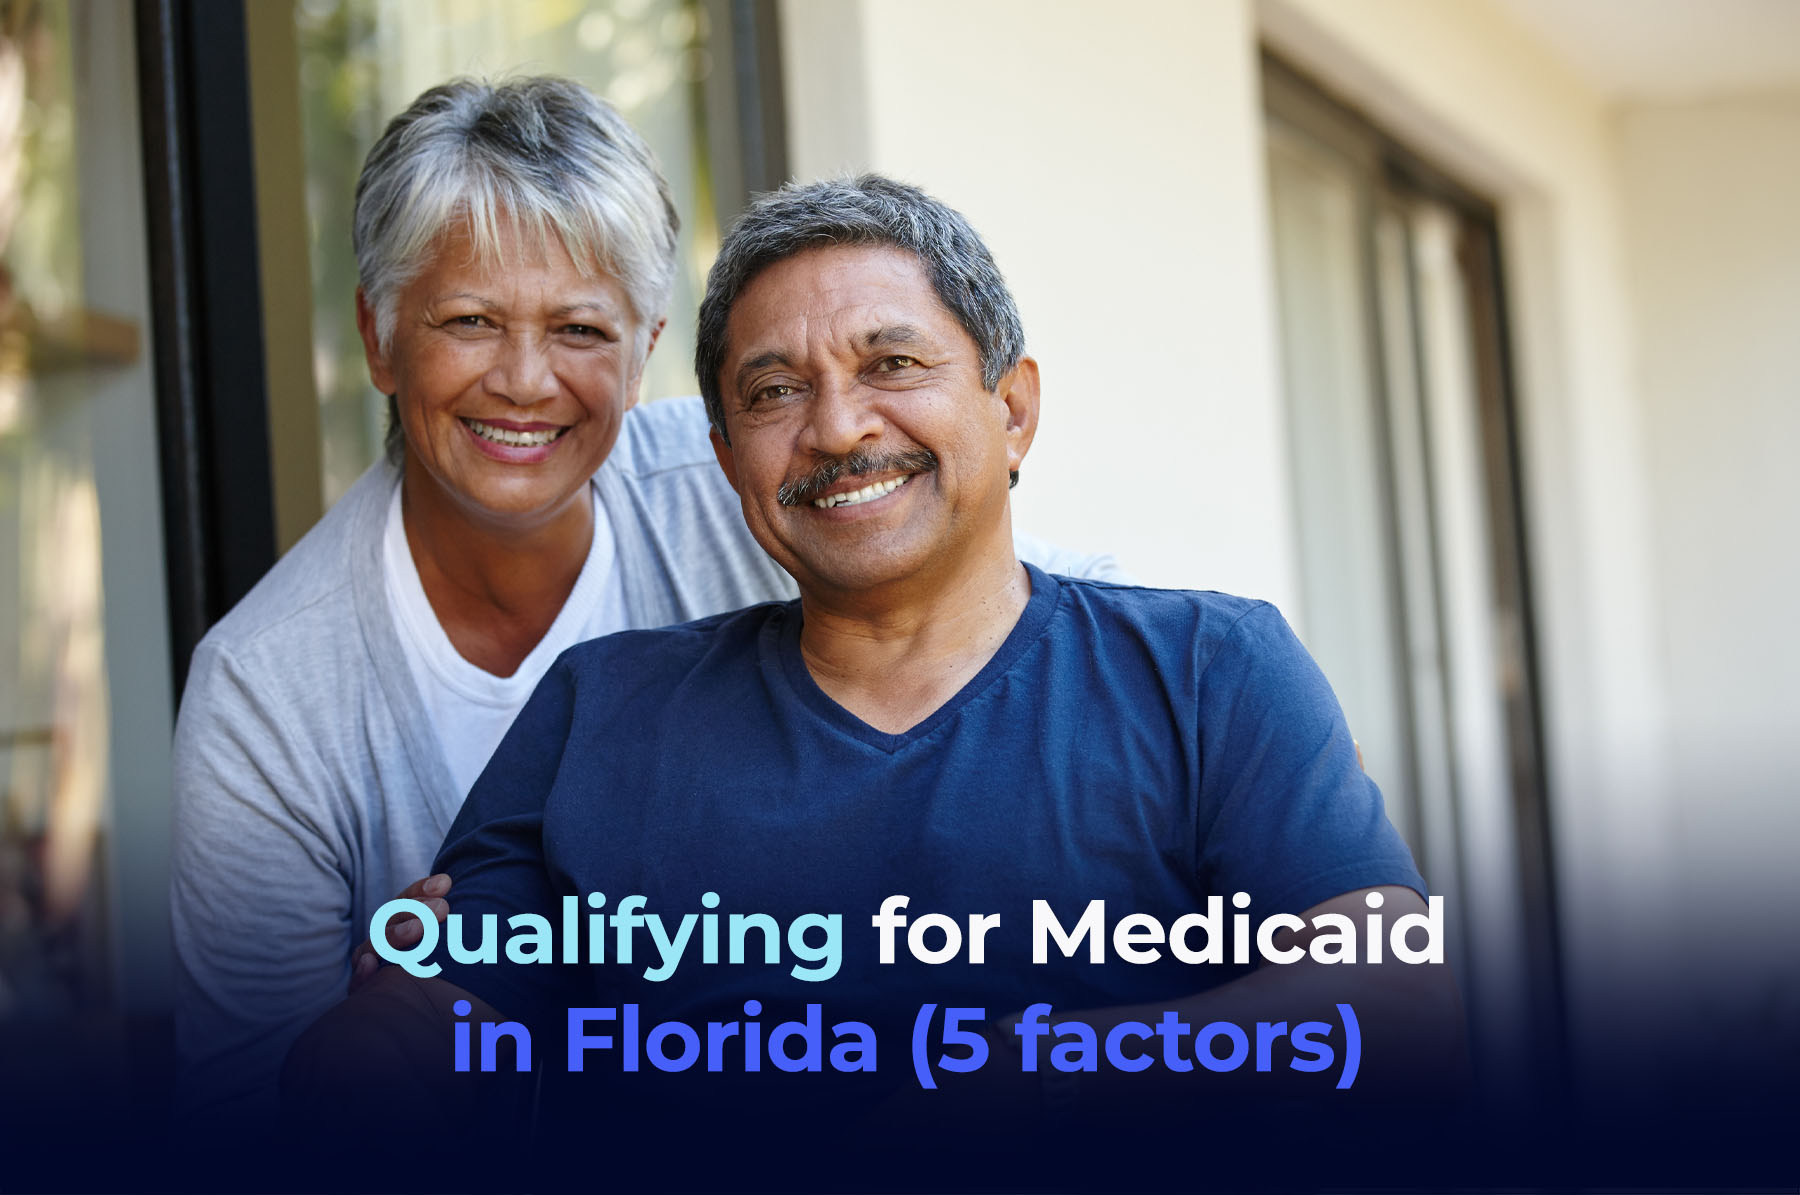 A senior latino couple smiling with the phrase "Qualifying for Medicaid in Florida (5 factors)"